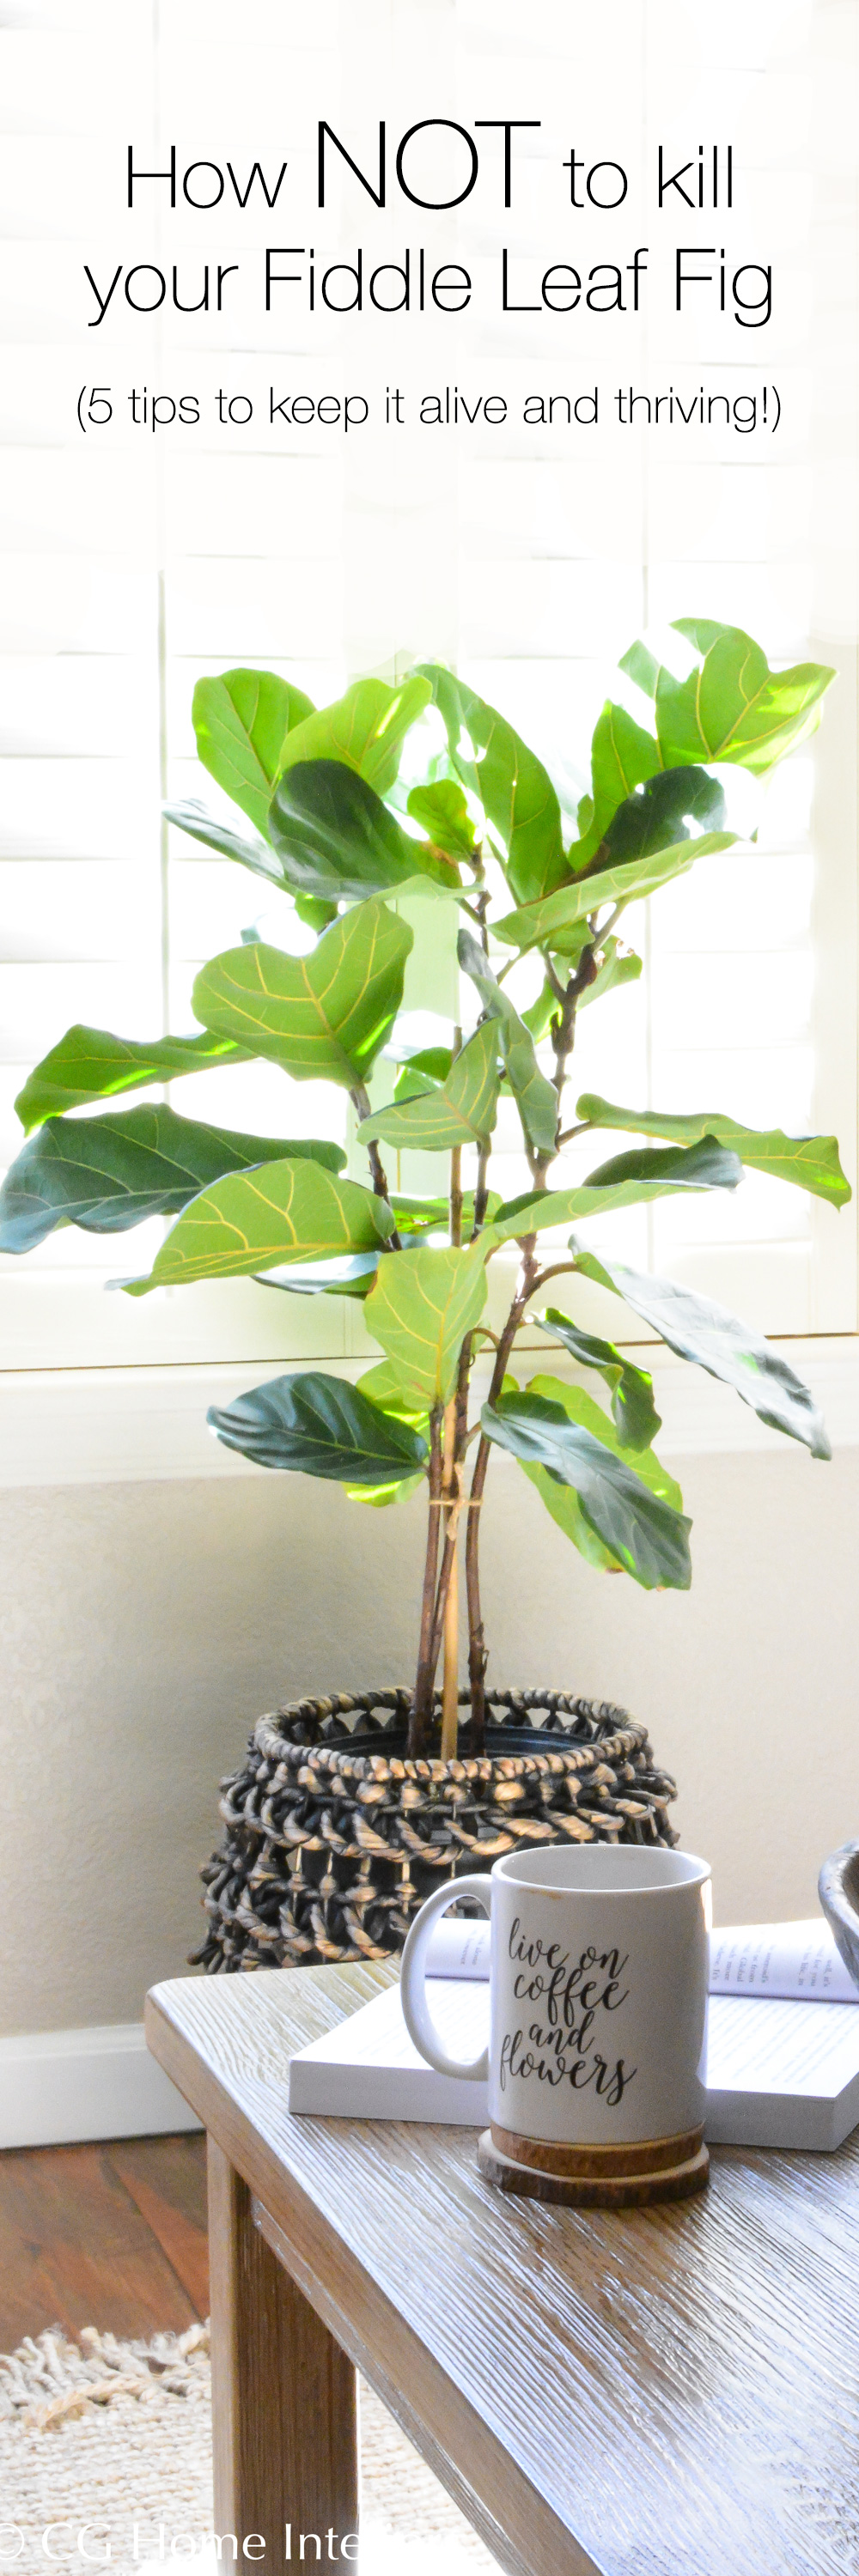 5 ways to keep your fiddle leaf fig tree alive